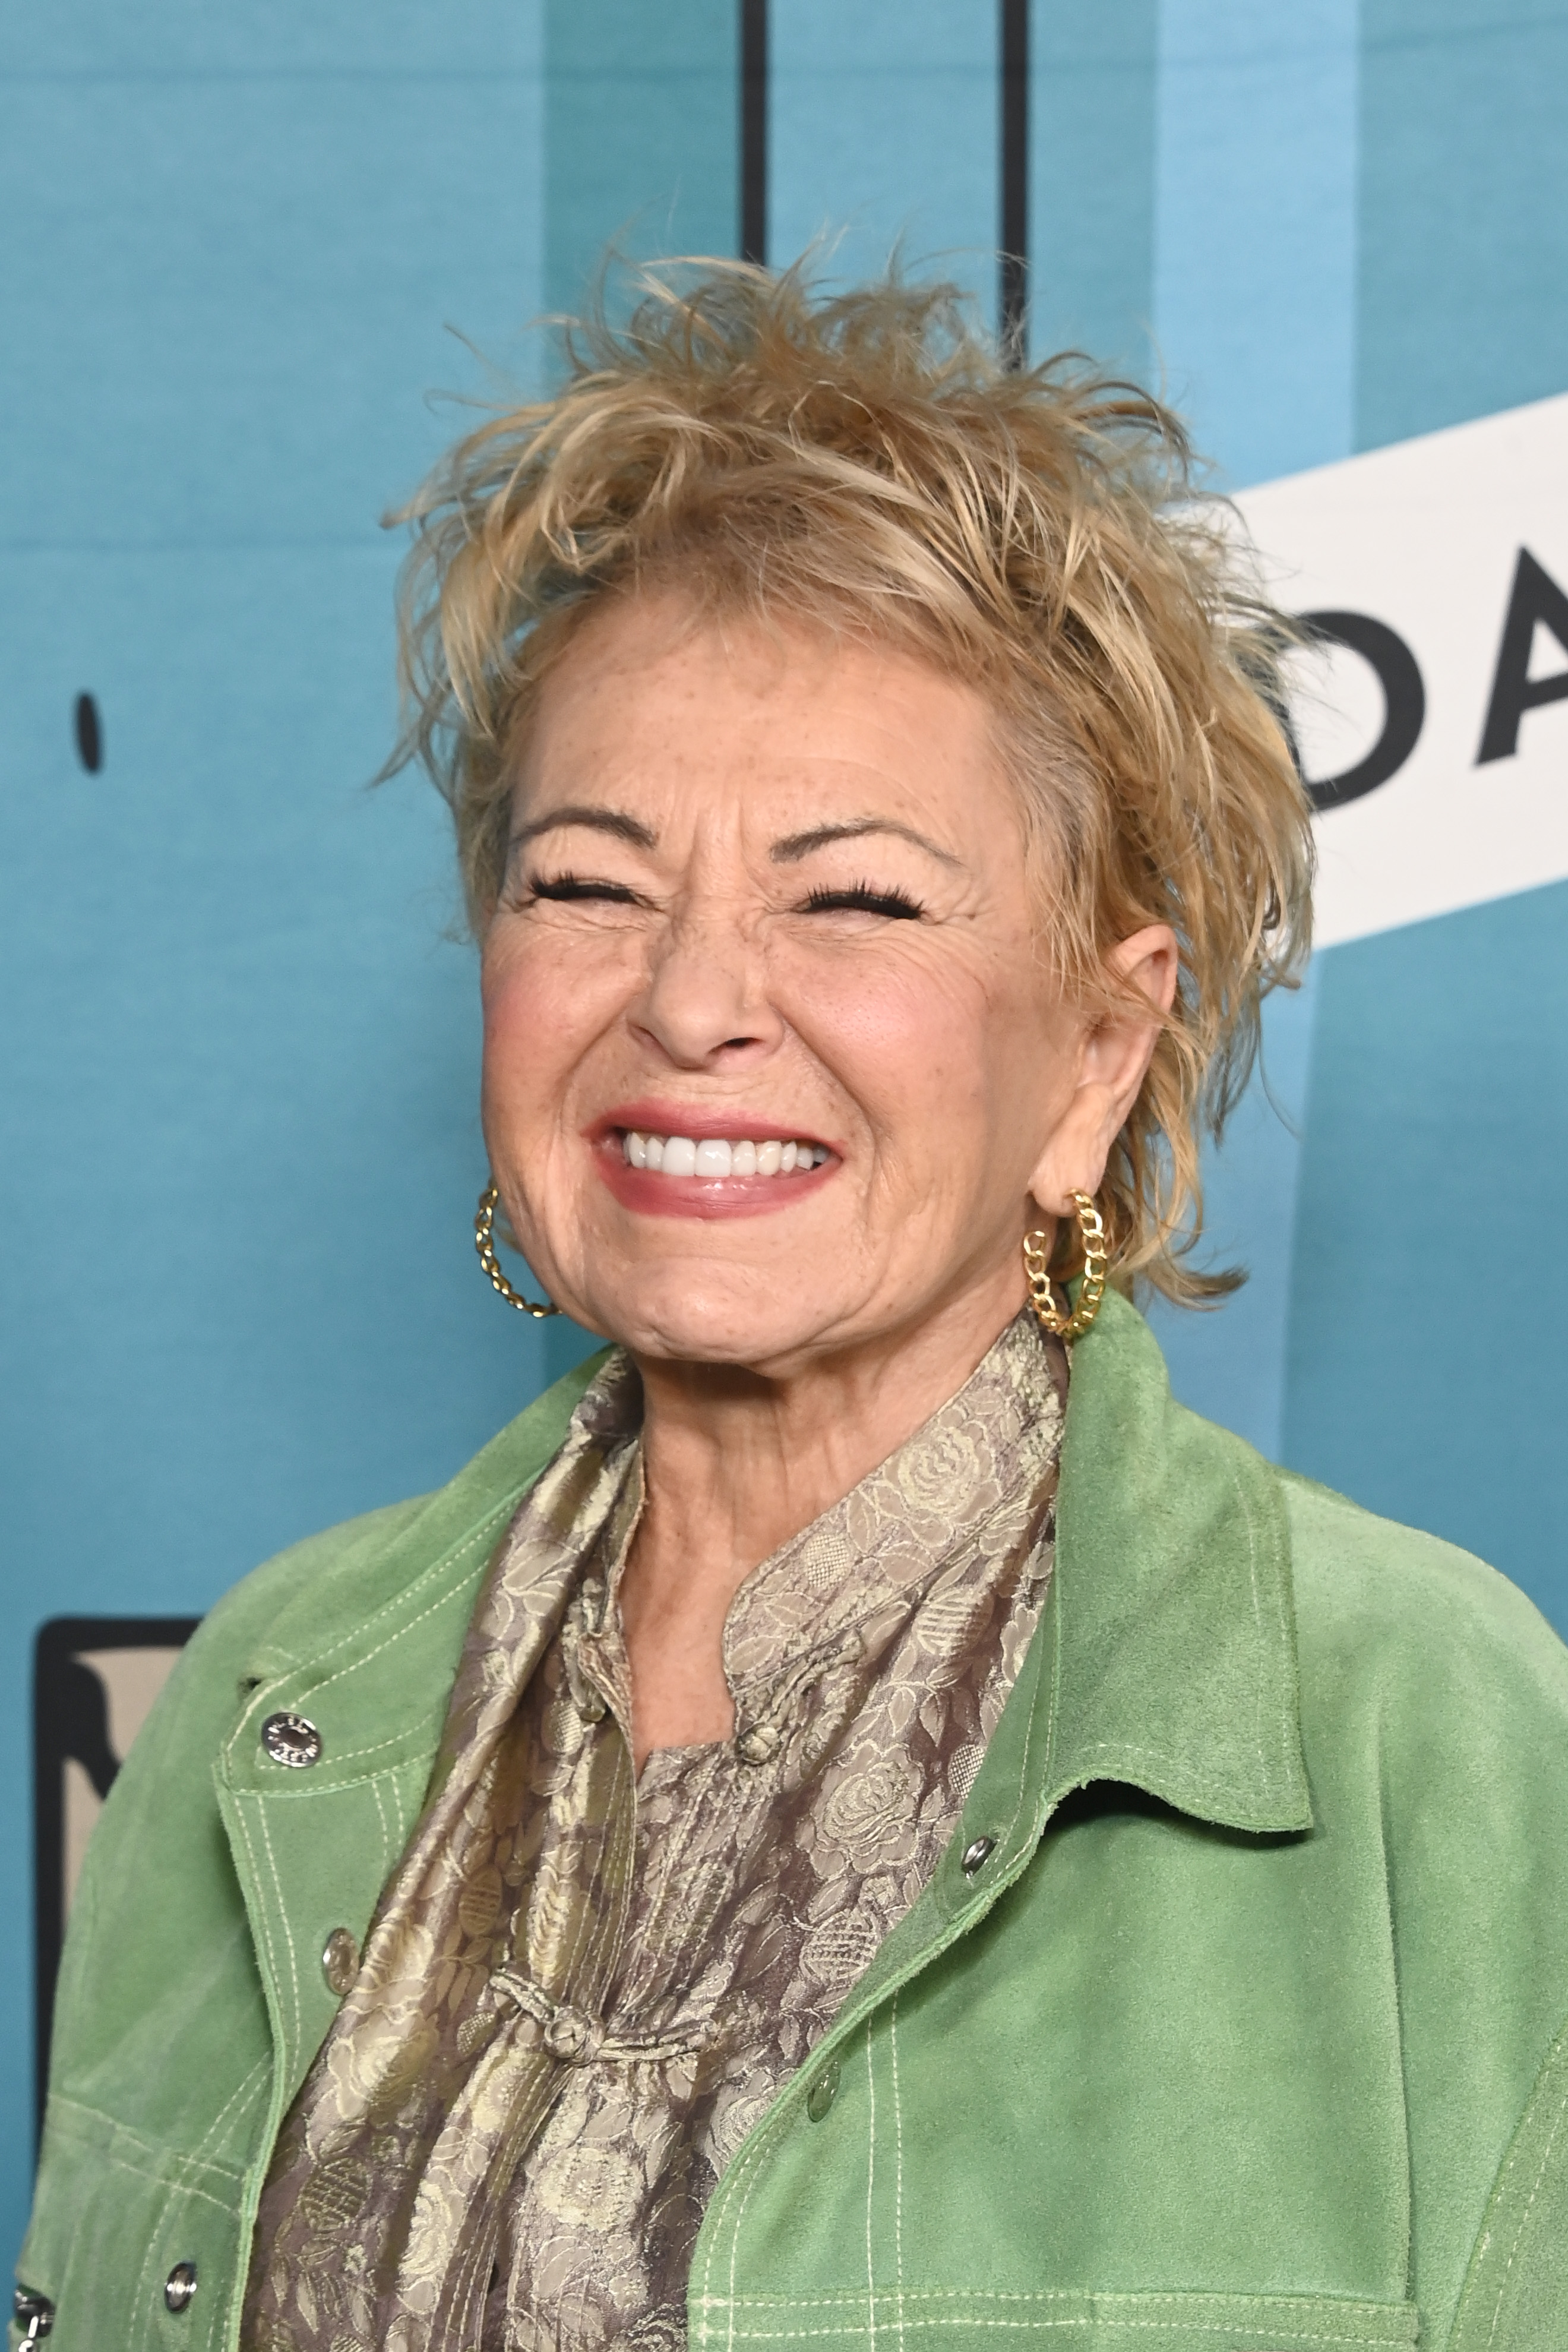 Roseanne Barr at the series premiere of "Mr. Birchum" in Los Angeles, California on May 7, 2024 | Source: Getty Images